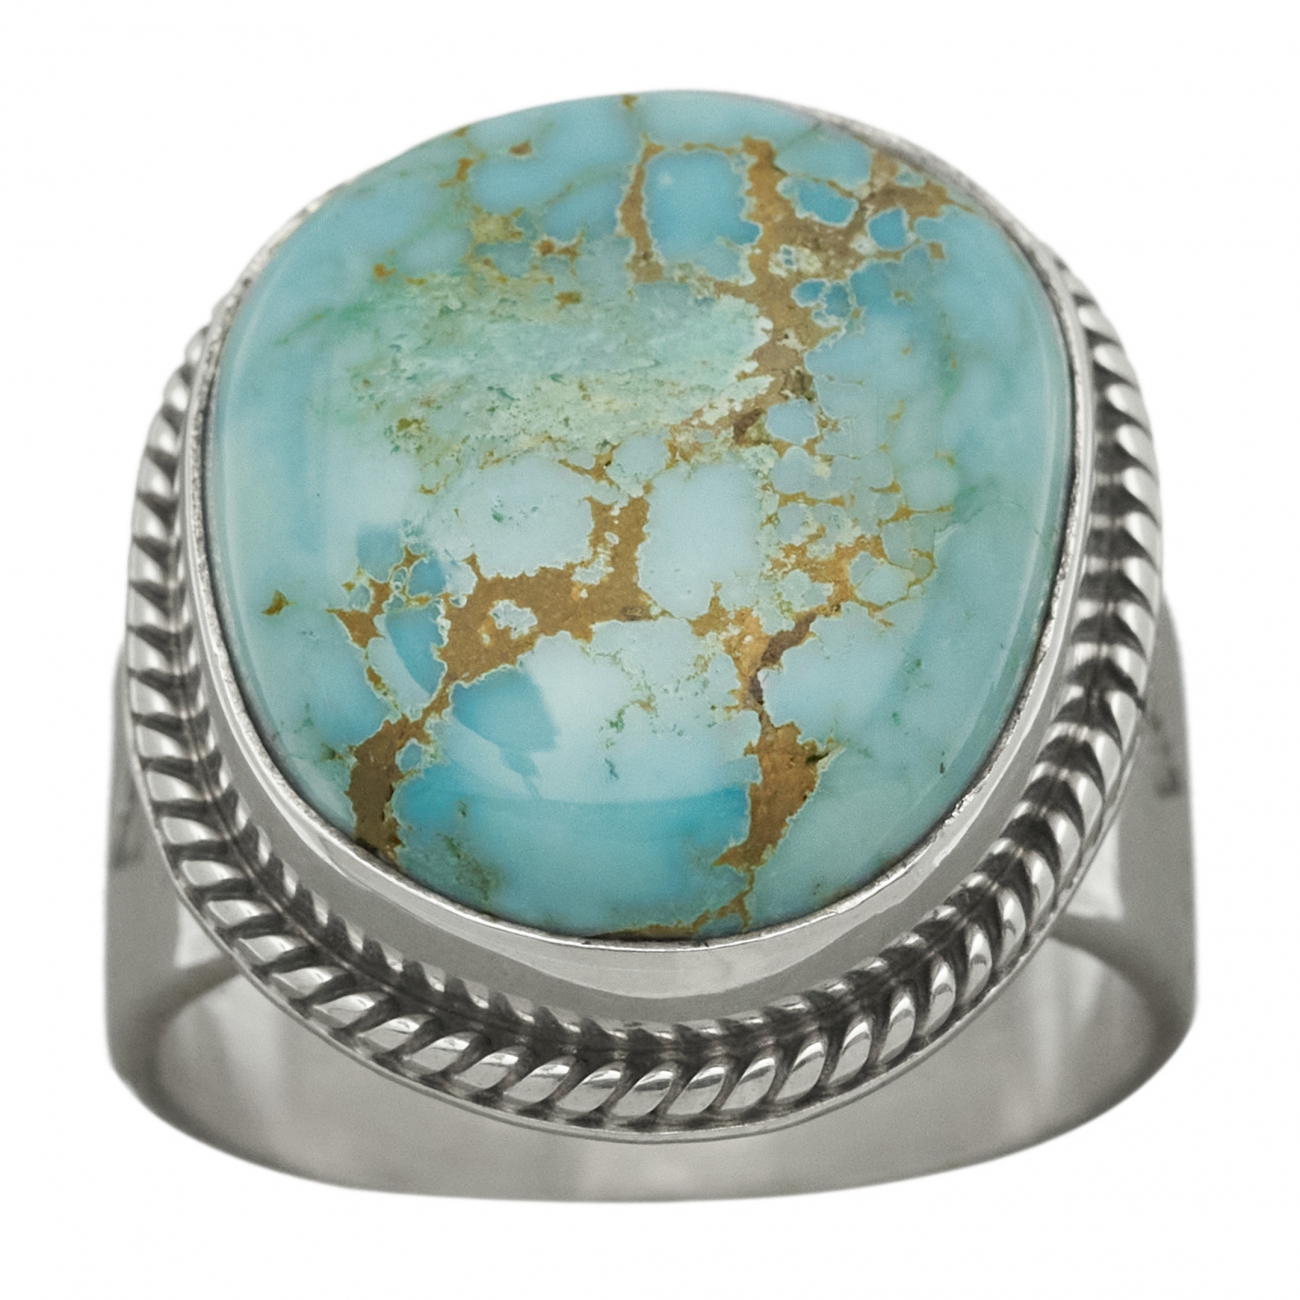 Navajo ring BA965 in turquoise and silver - Harpo Paris